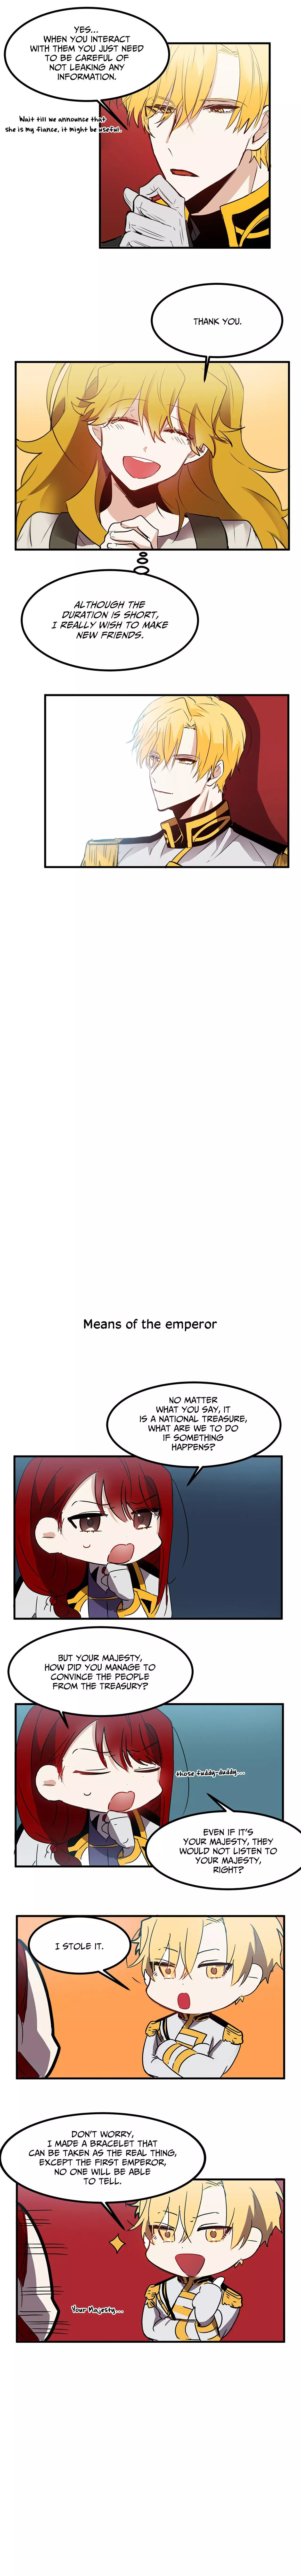 Living As The Emperor's Fiancé - 12 page 8